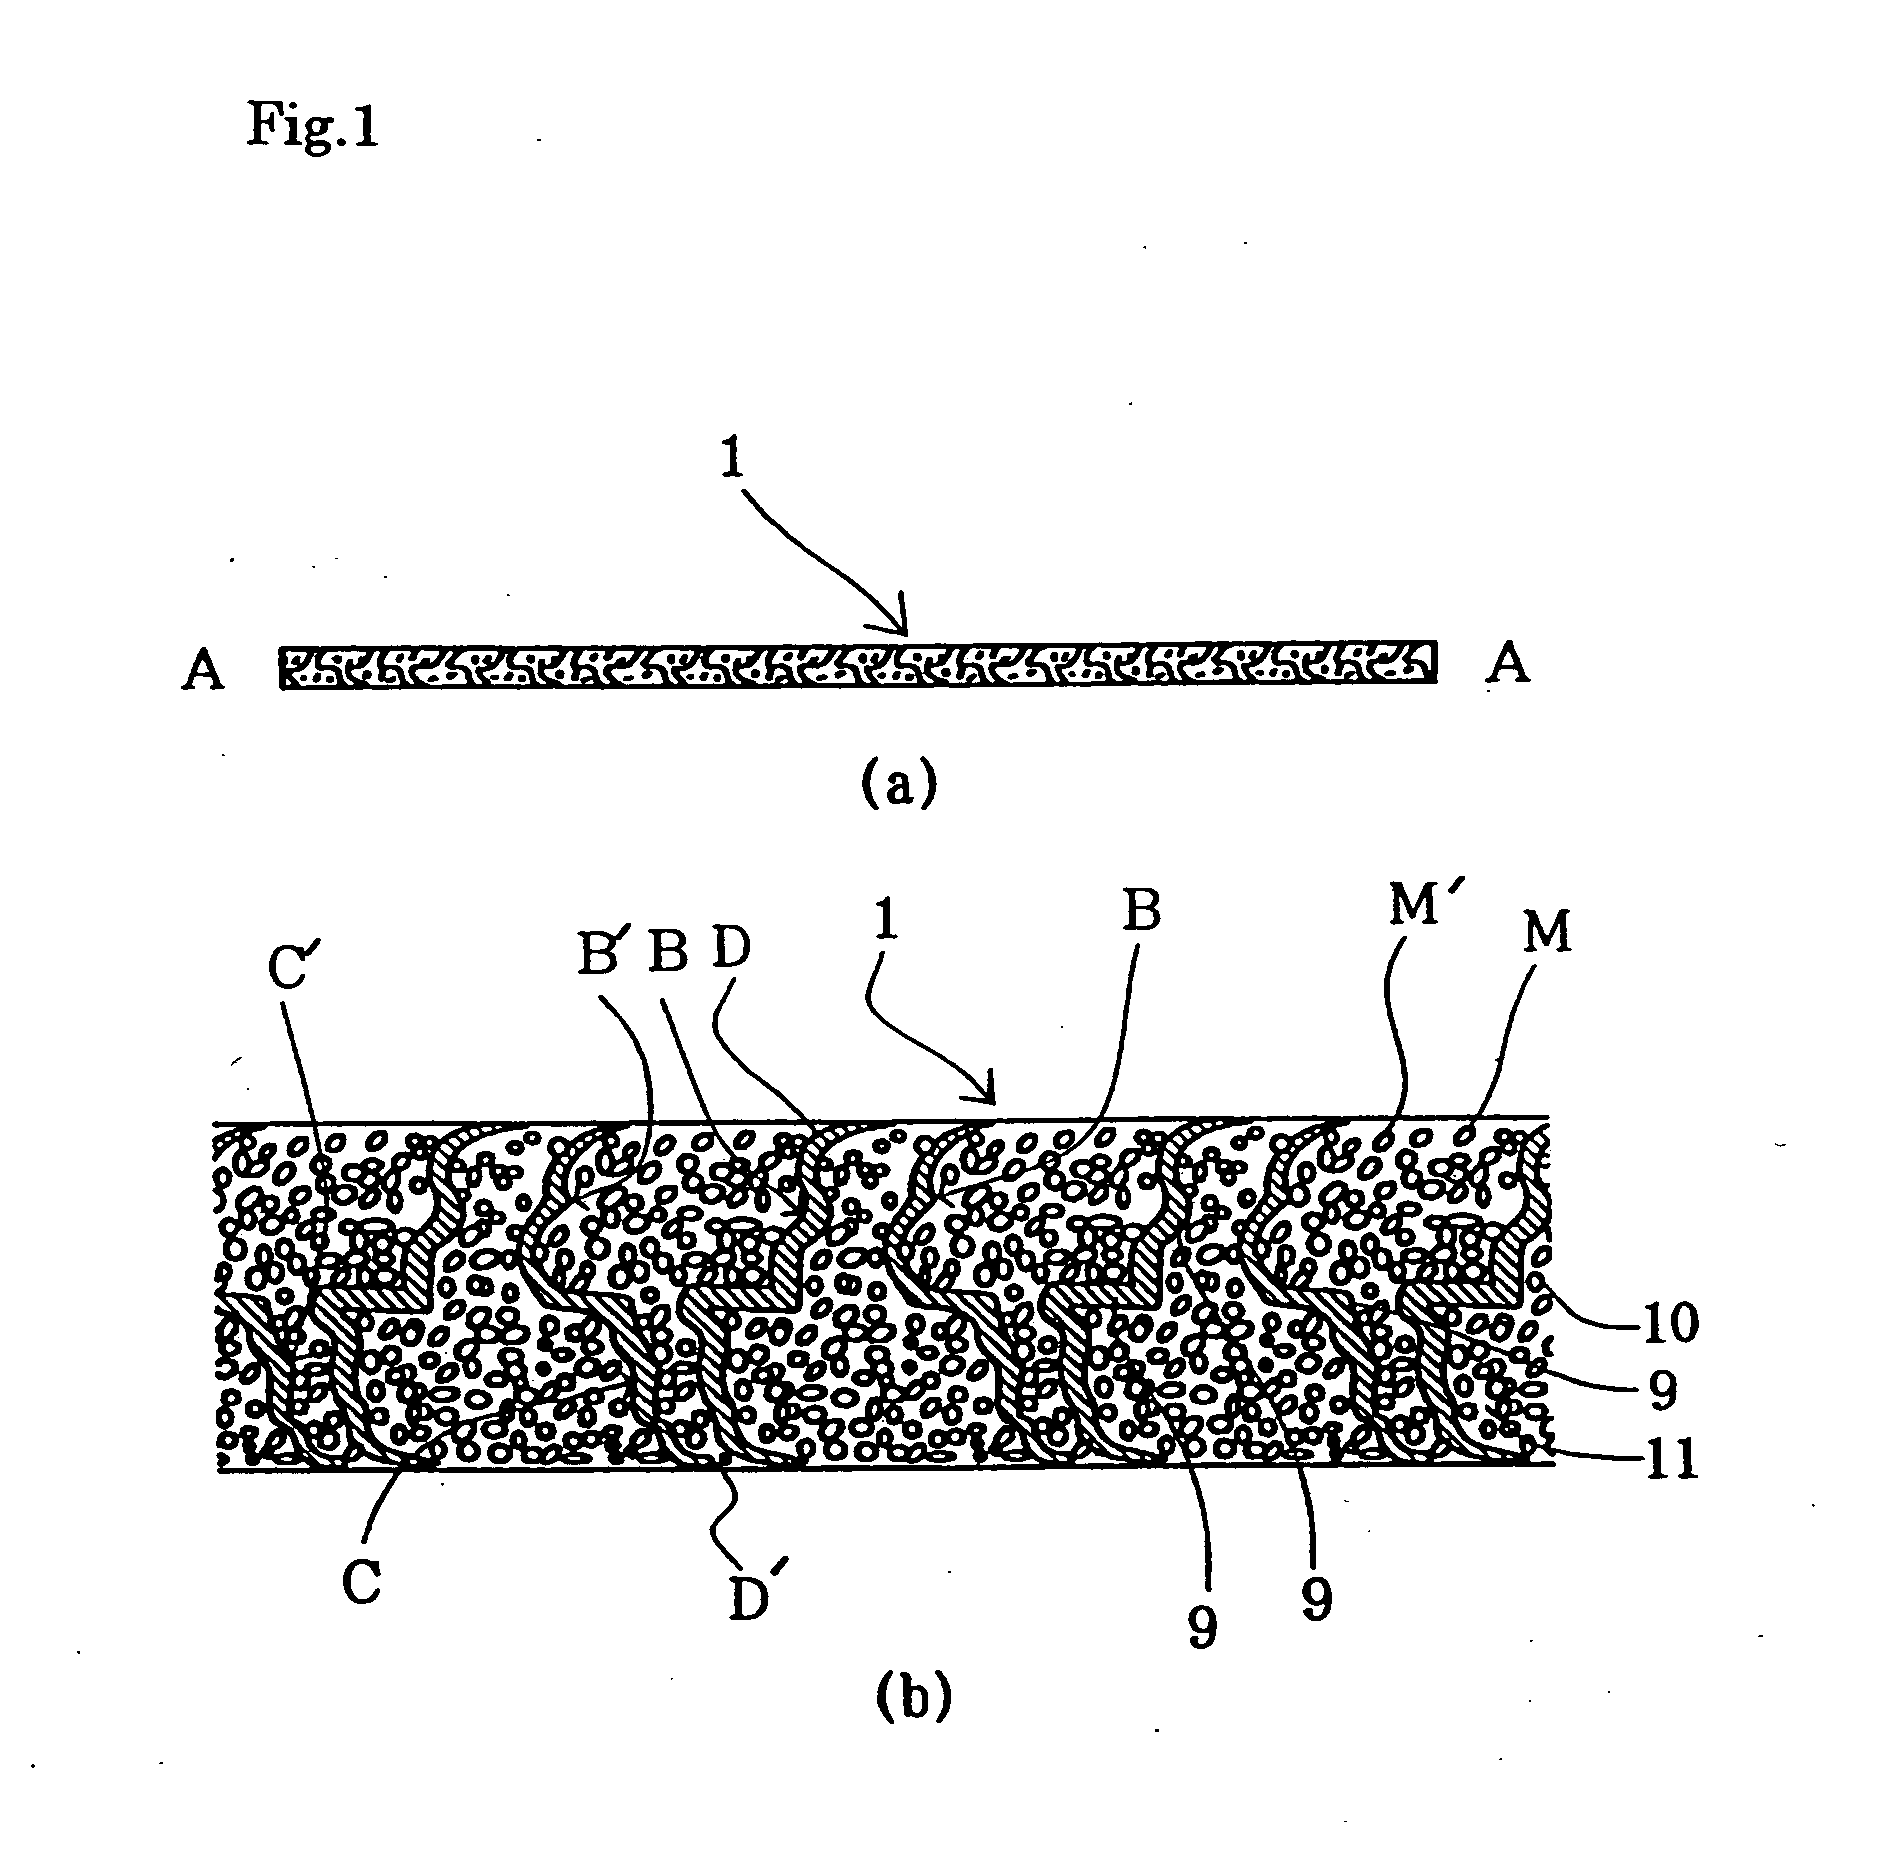 Non-sintered type thin electrode for battery, battery using same and process for same